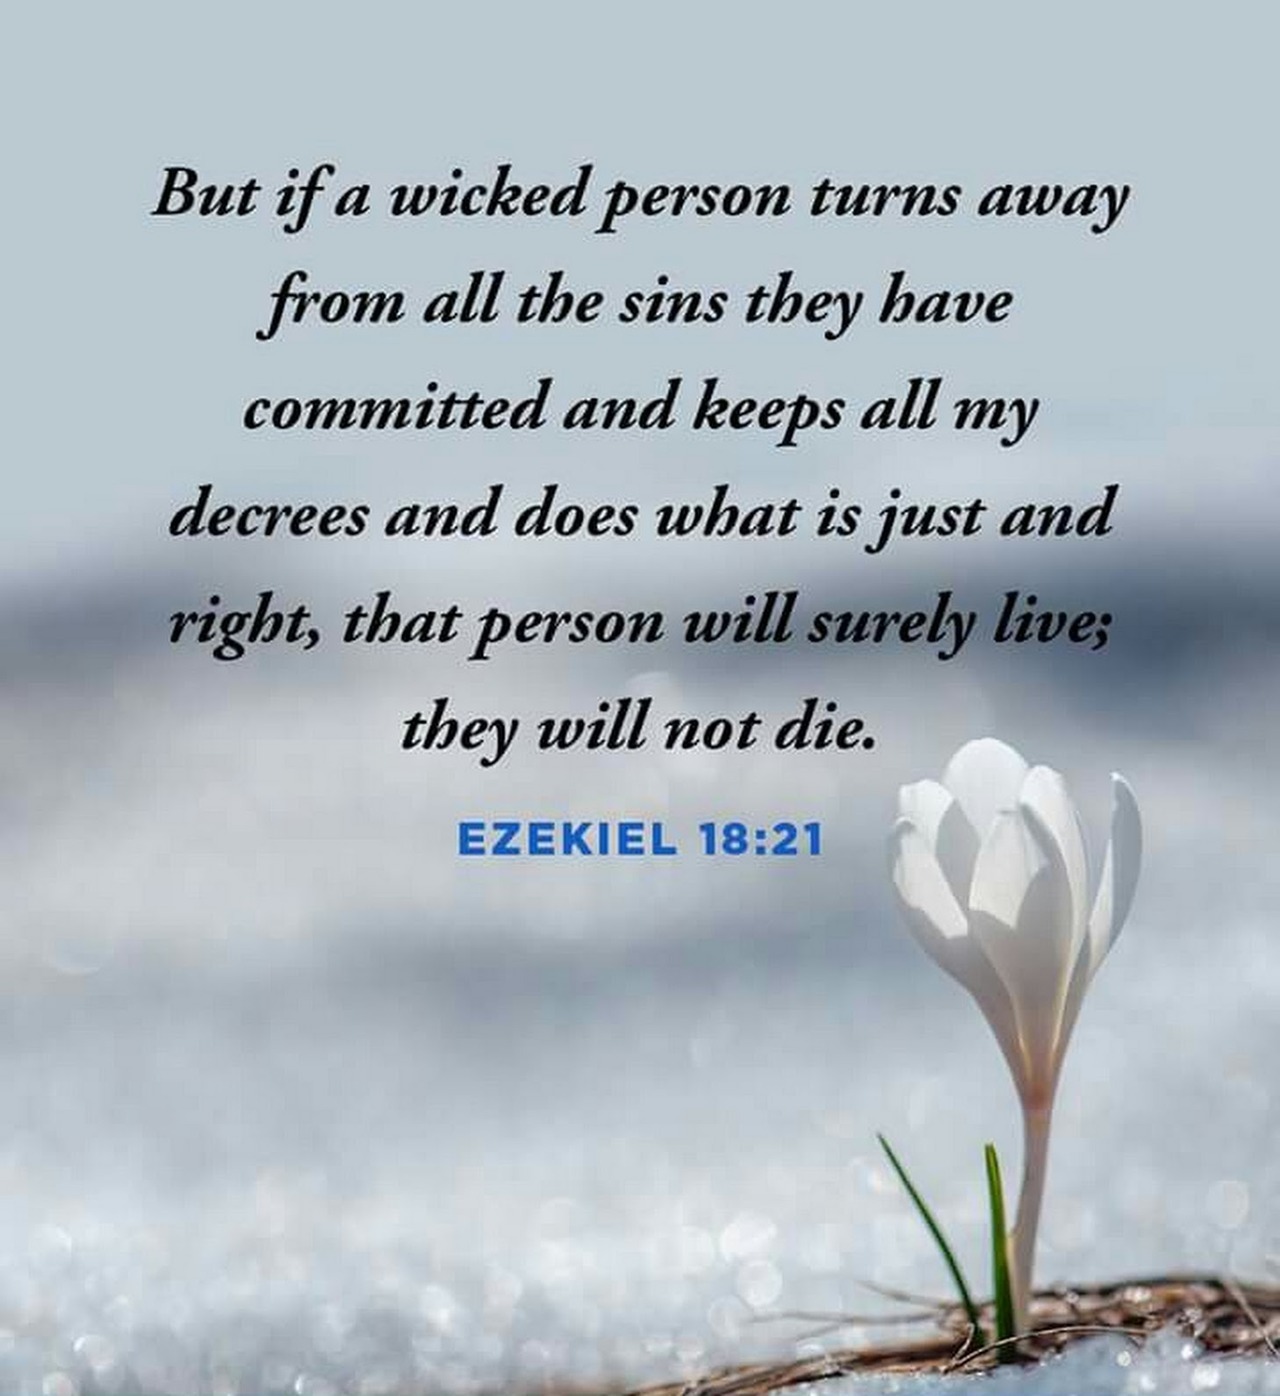 The Living... — Ezekiel 18:21 (NIV) - “But if a wicked person...